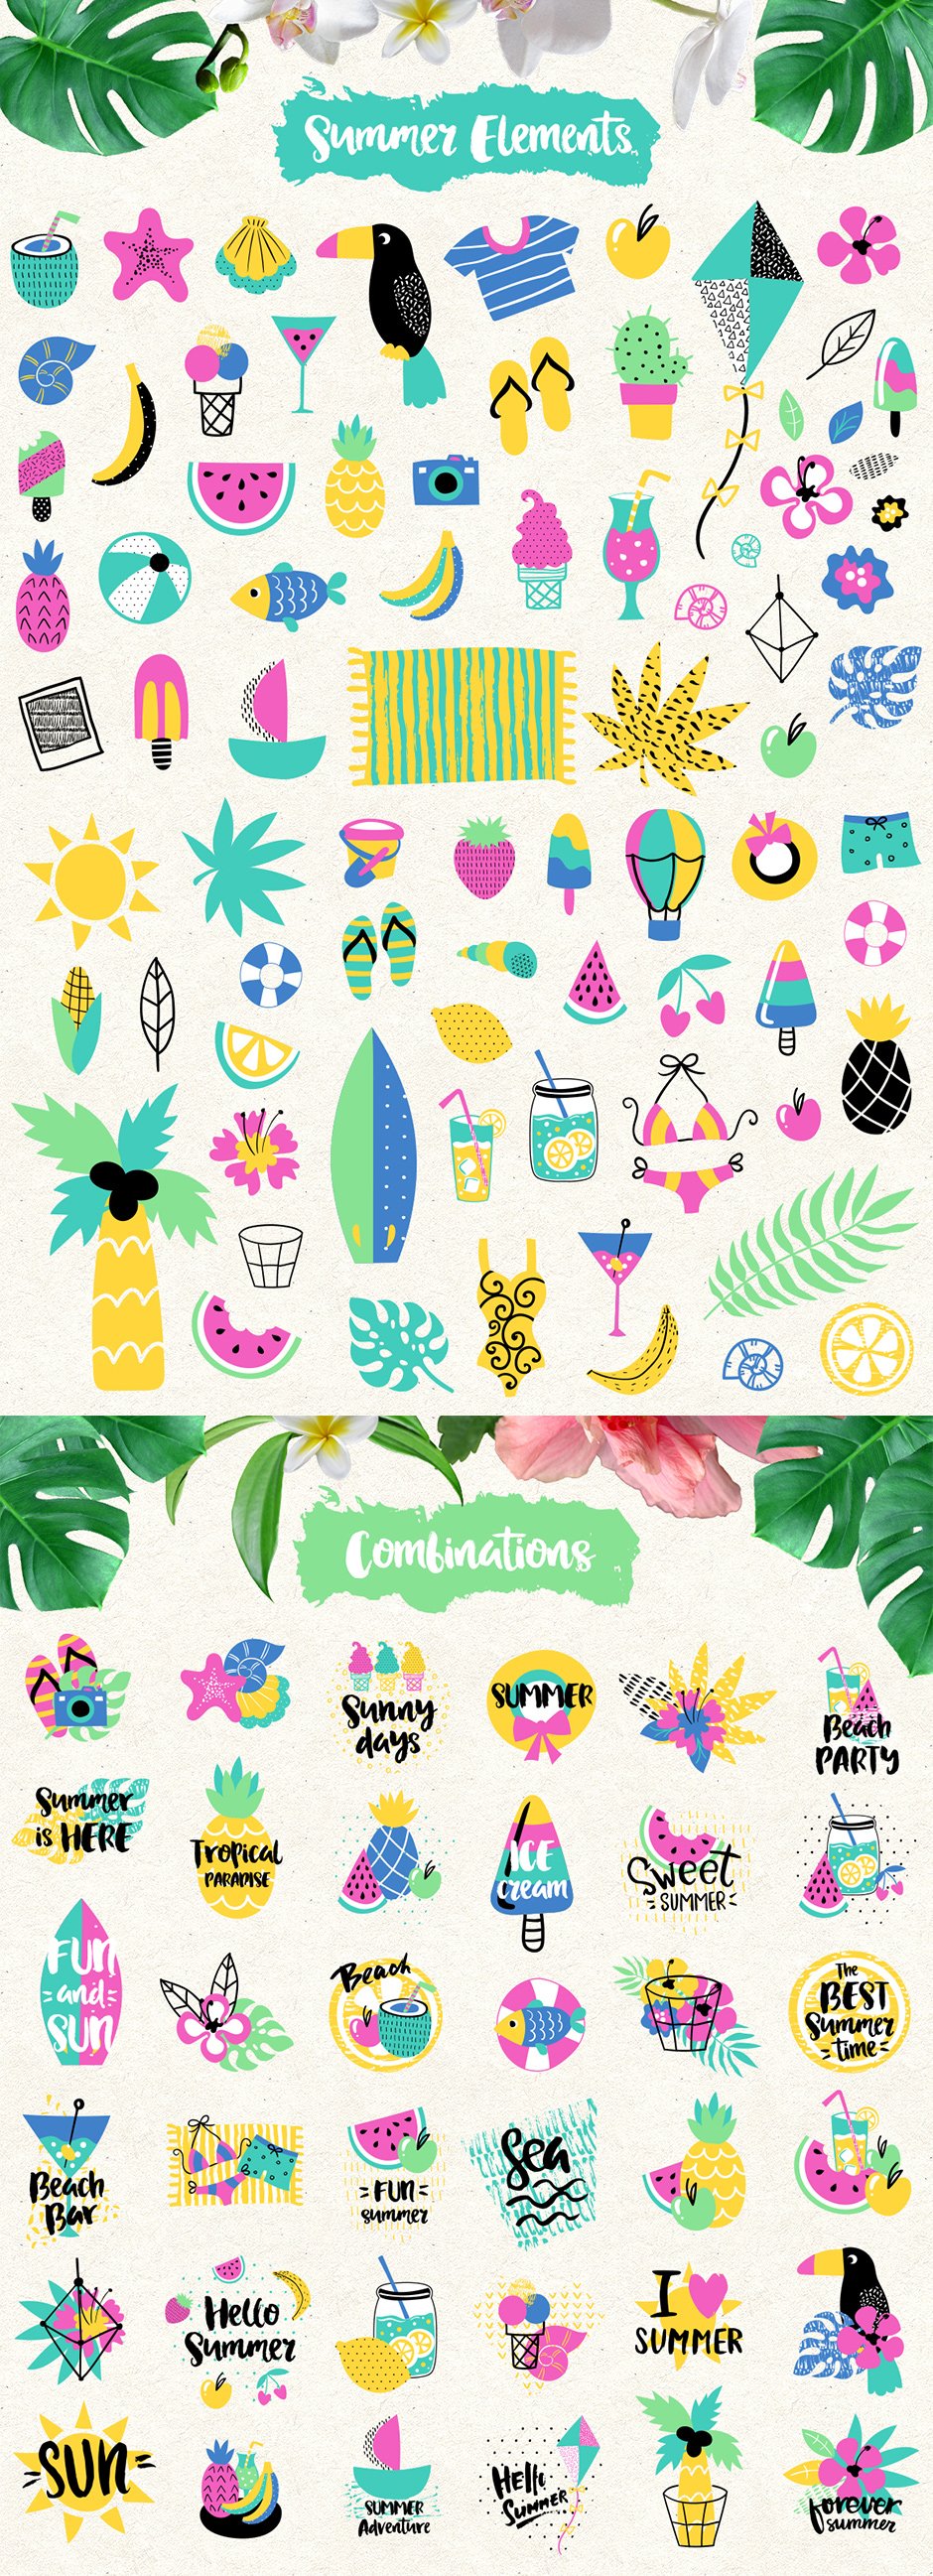 Summer Paradise Big Collection: 285 Summer Elements